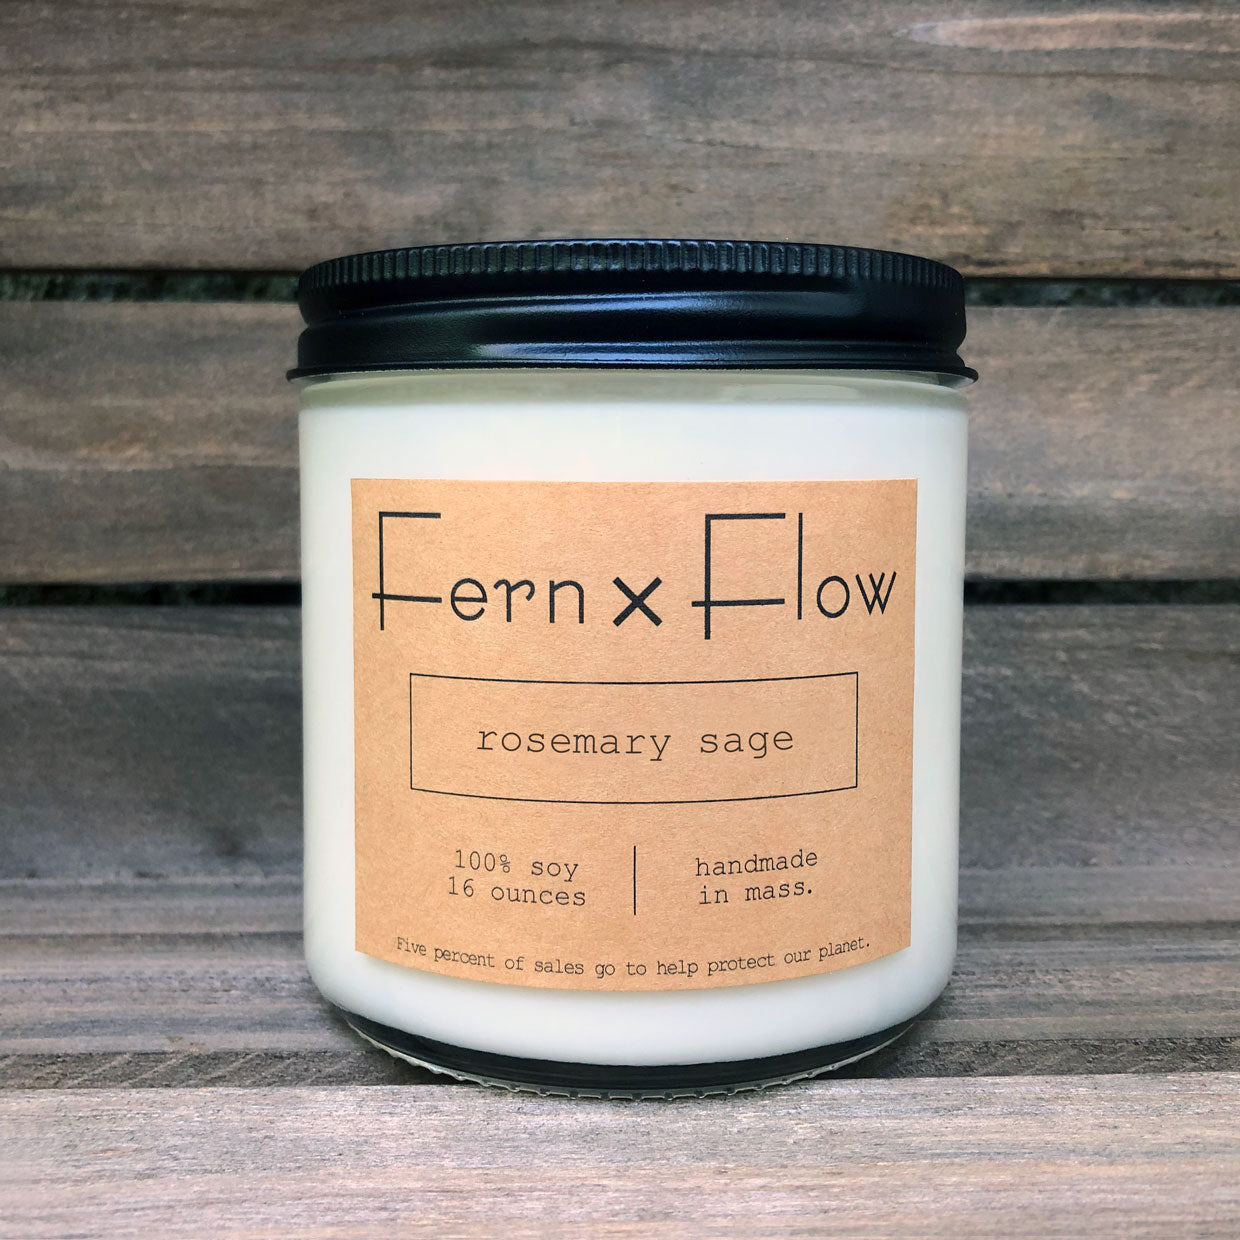 Sixteen-ounce Fern x Flow Rosemary Sage scented soy candle against a weathered, wooden crate.